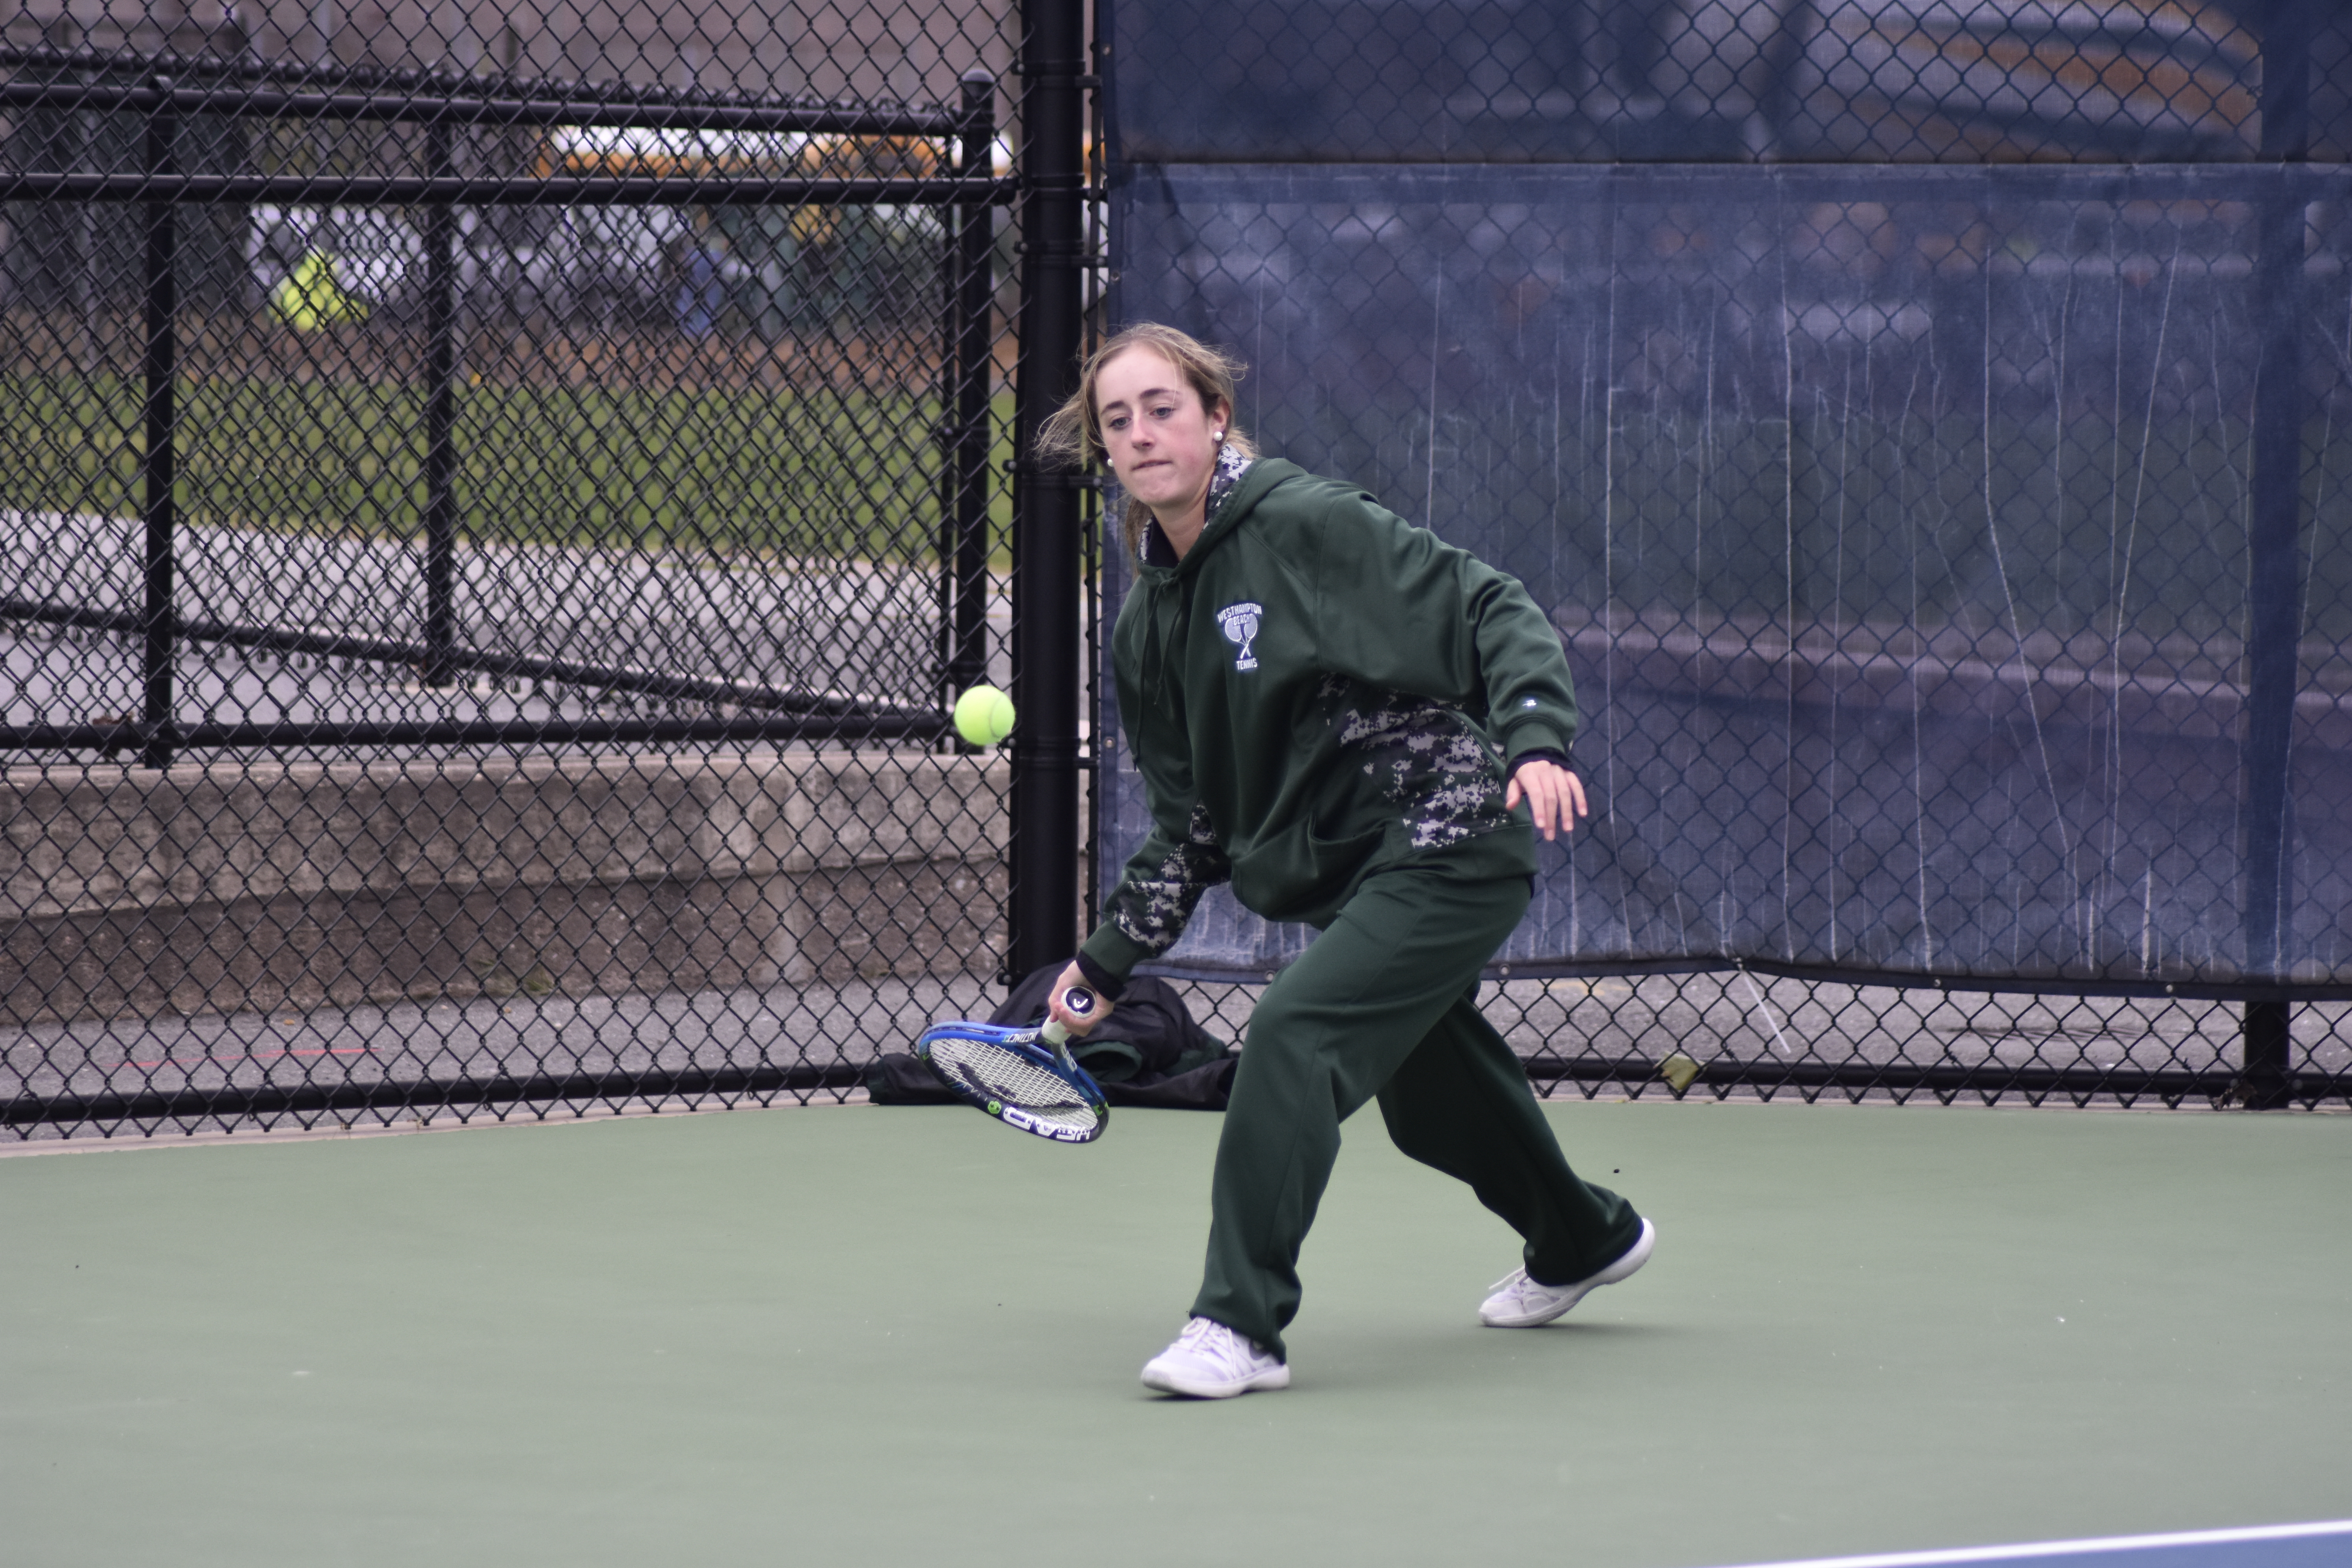 Jen Curran, pictured, won the doubles title with teammate Rose Peruso